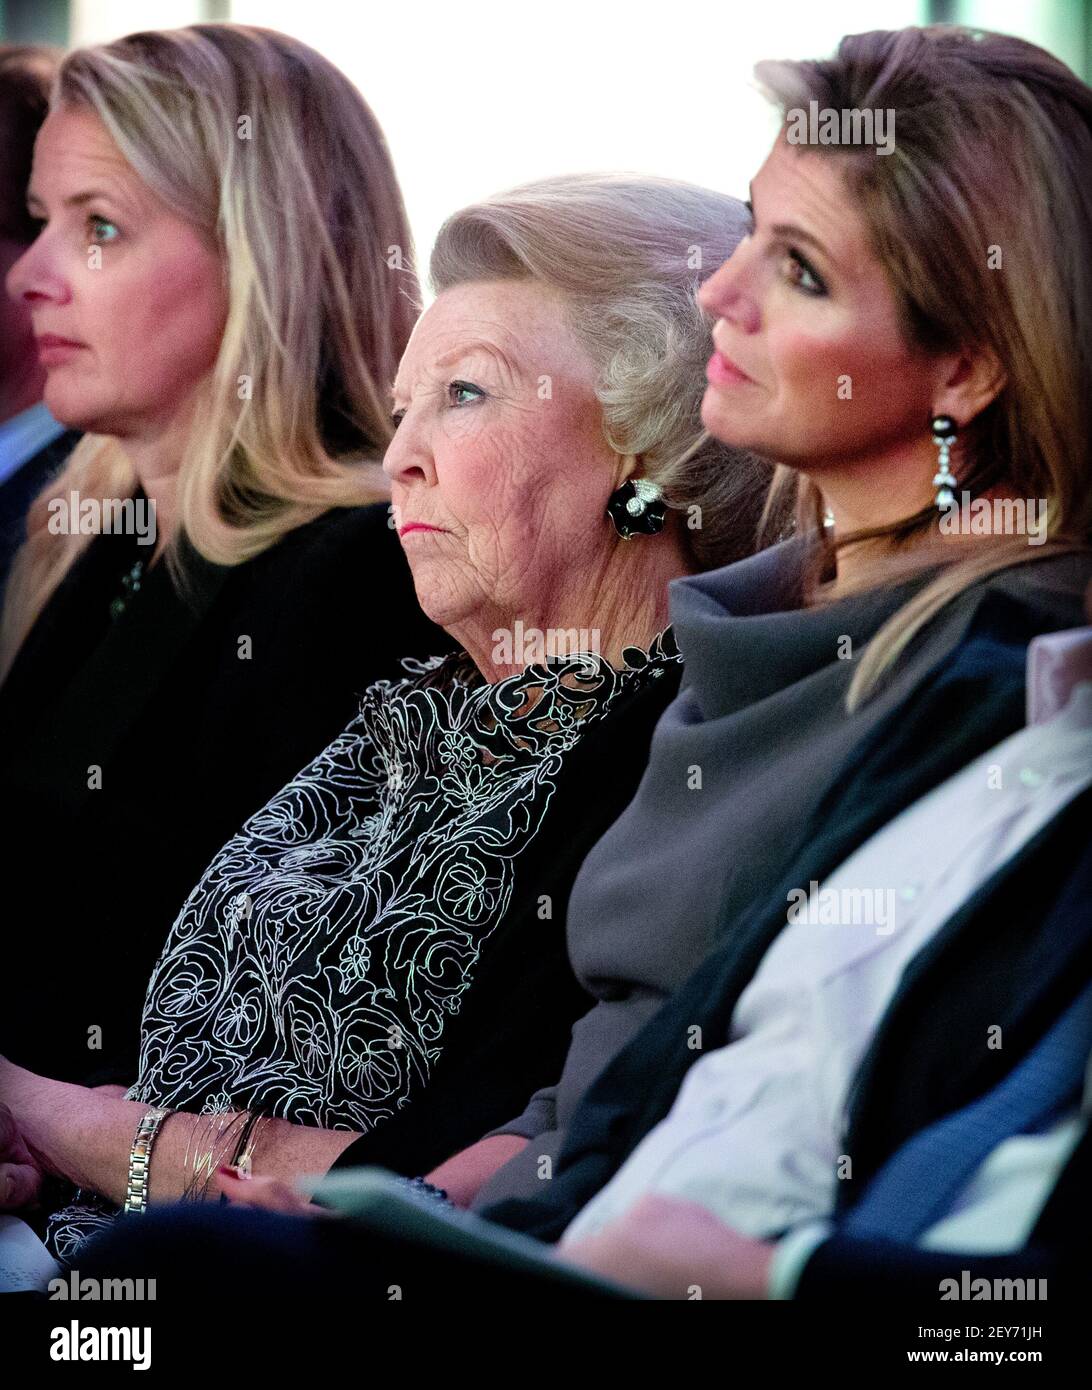 10-12-2014 AMSTERDAM - Queen Maxima, Princess Beatrix, Princess Mabel attend the award ceremony of the Prince Claus Prize 2014 to Columbian artist and plant expert Abel RodrÃguez at the Royal Palace in Amsterdam (Photo by Robin Utrecht/Sipa USA) Stock Photo